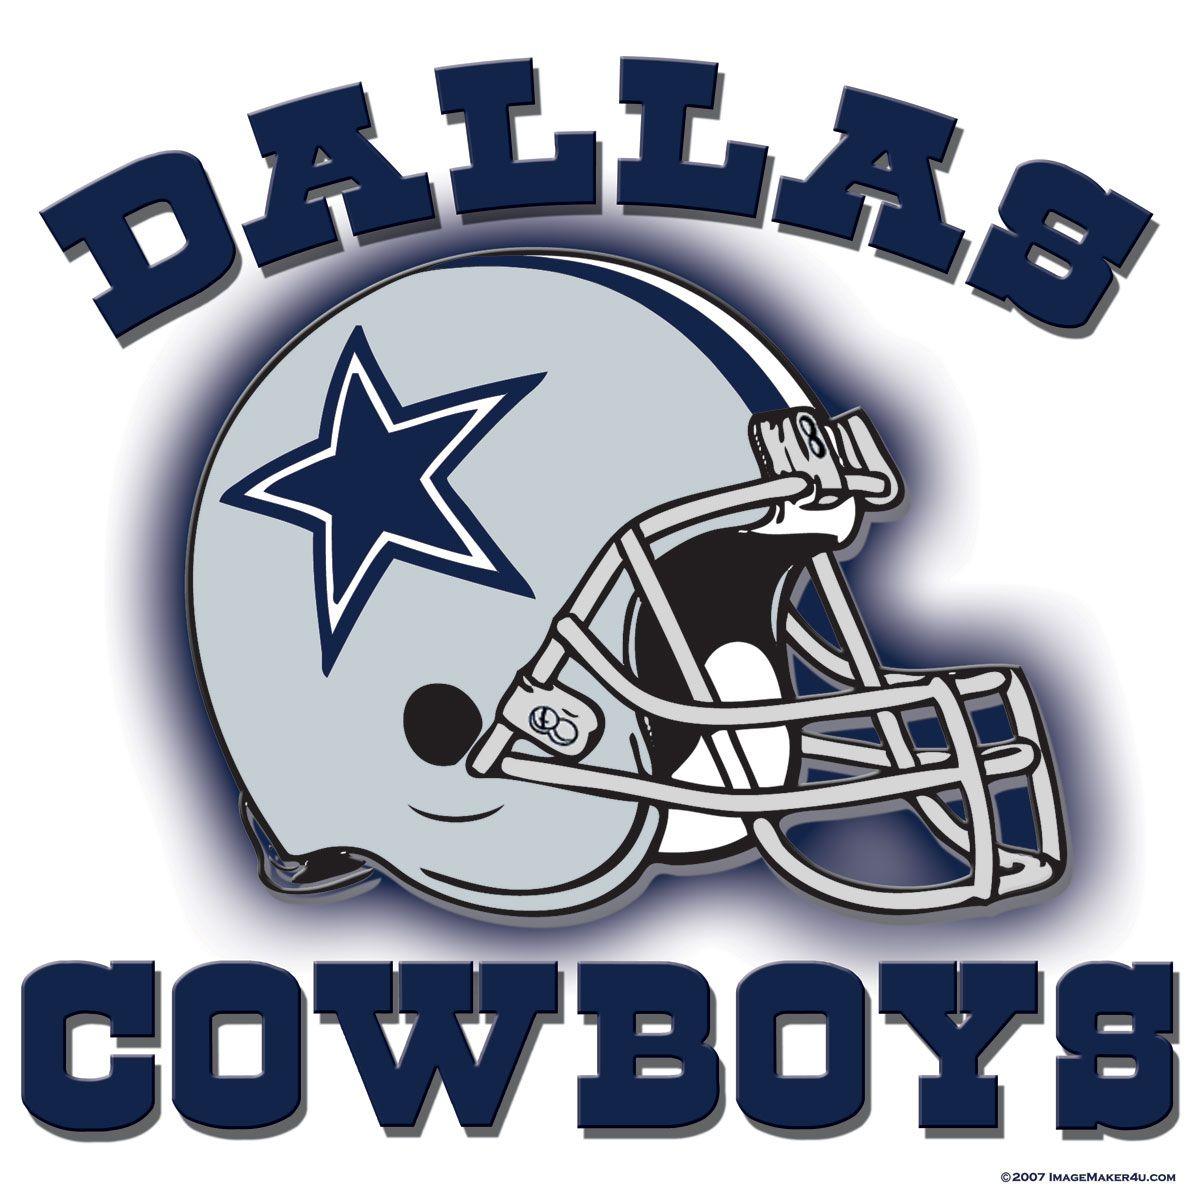 Cowboys Football Logo - planning a cowboys football game party | sscatering.com